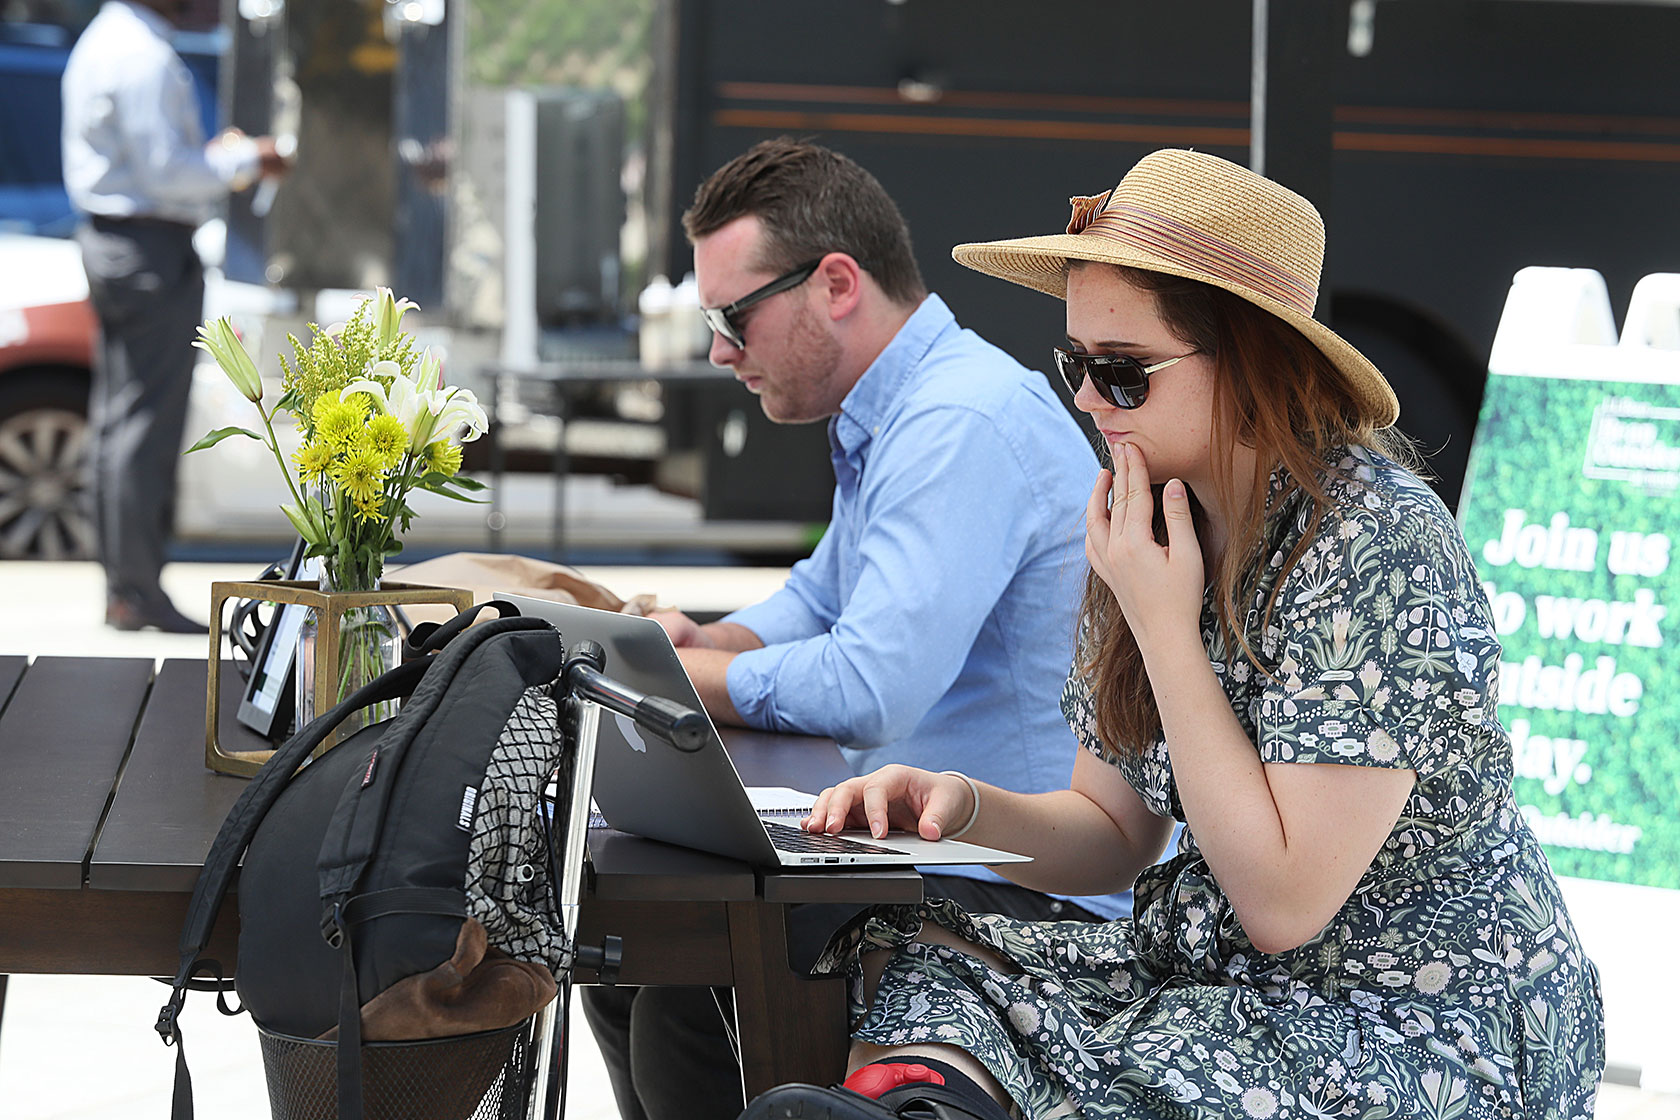 A law student and a self-employed worker use an outdoor coworking space in Boston.